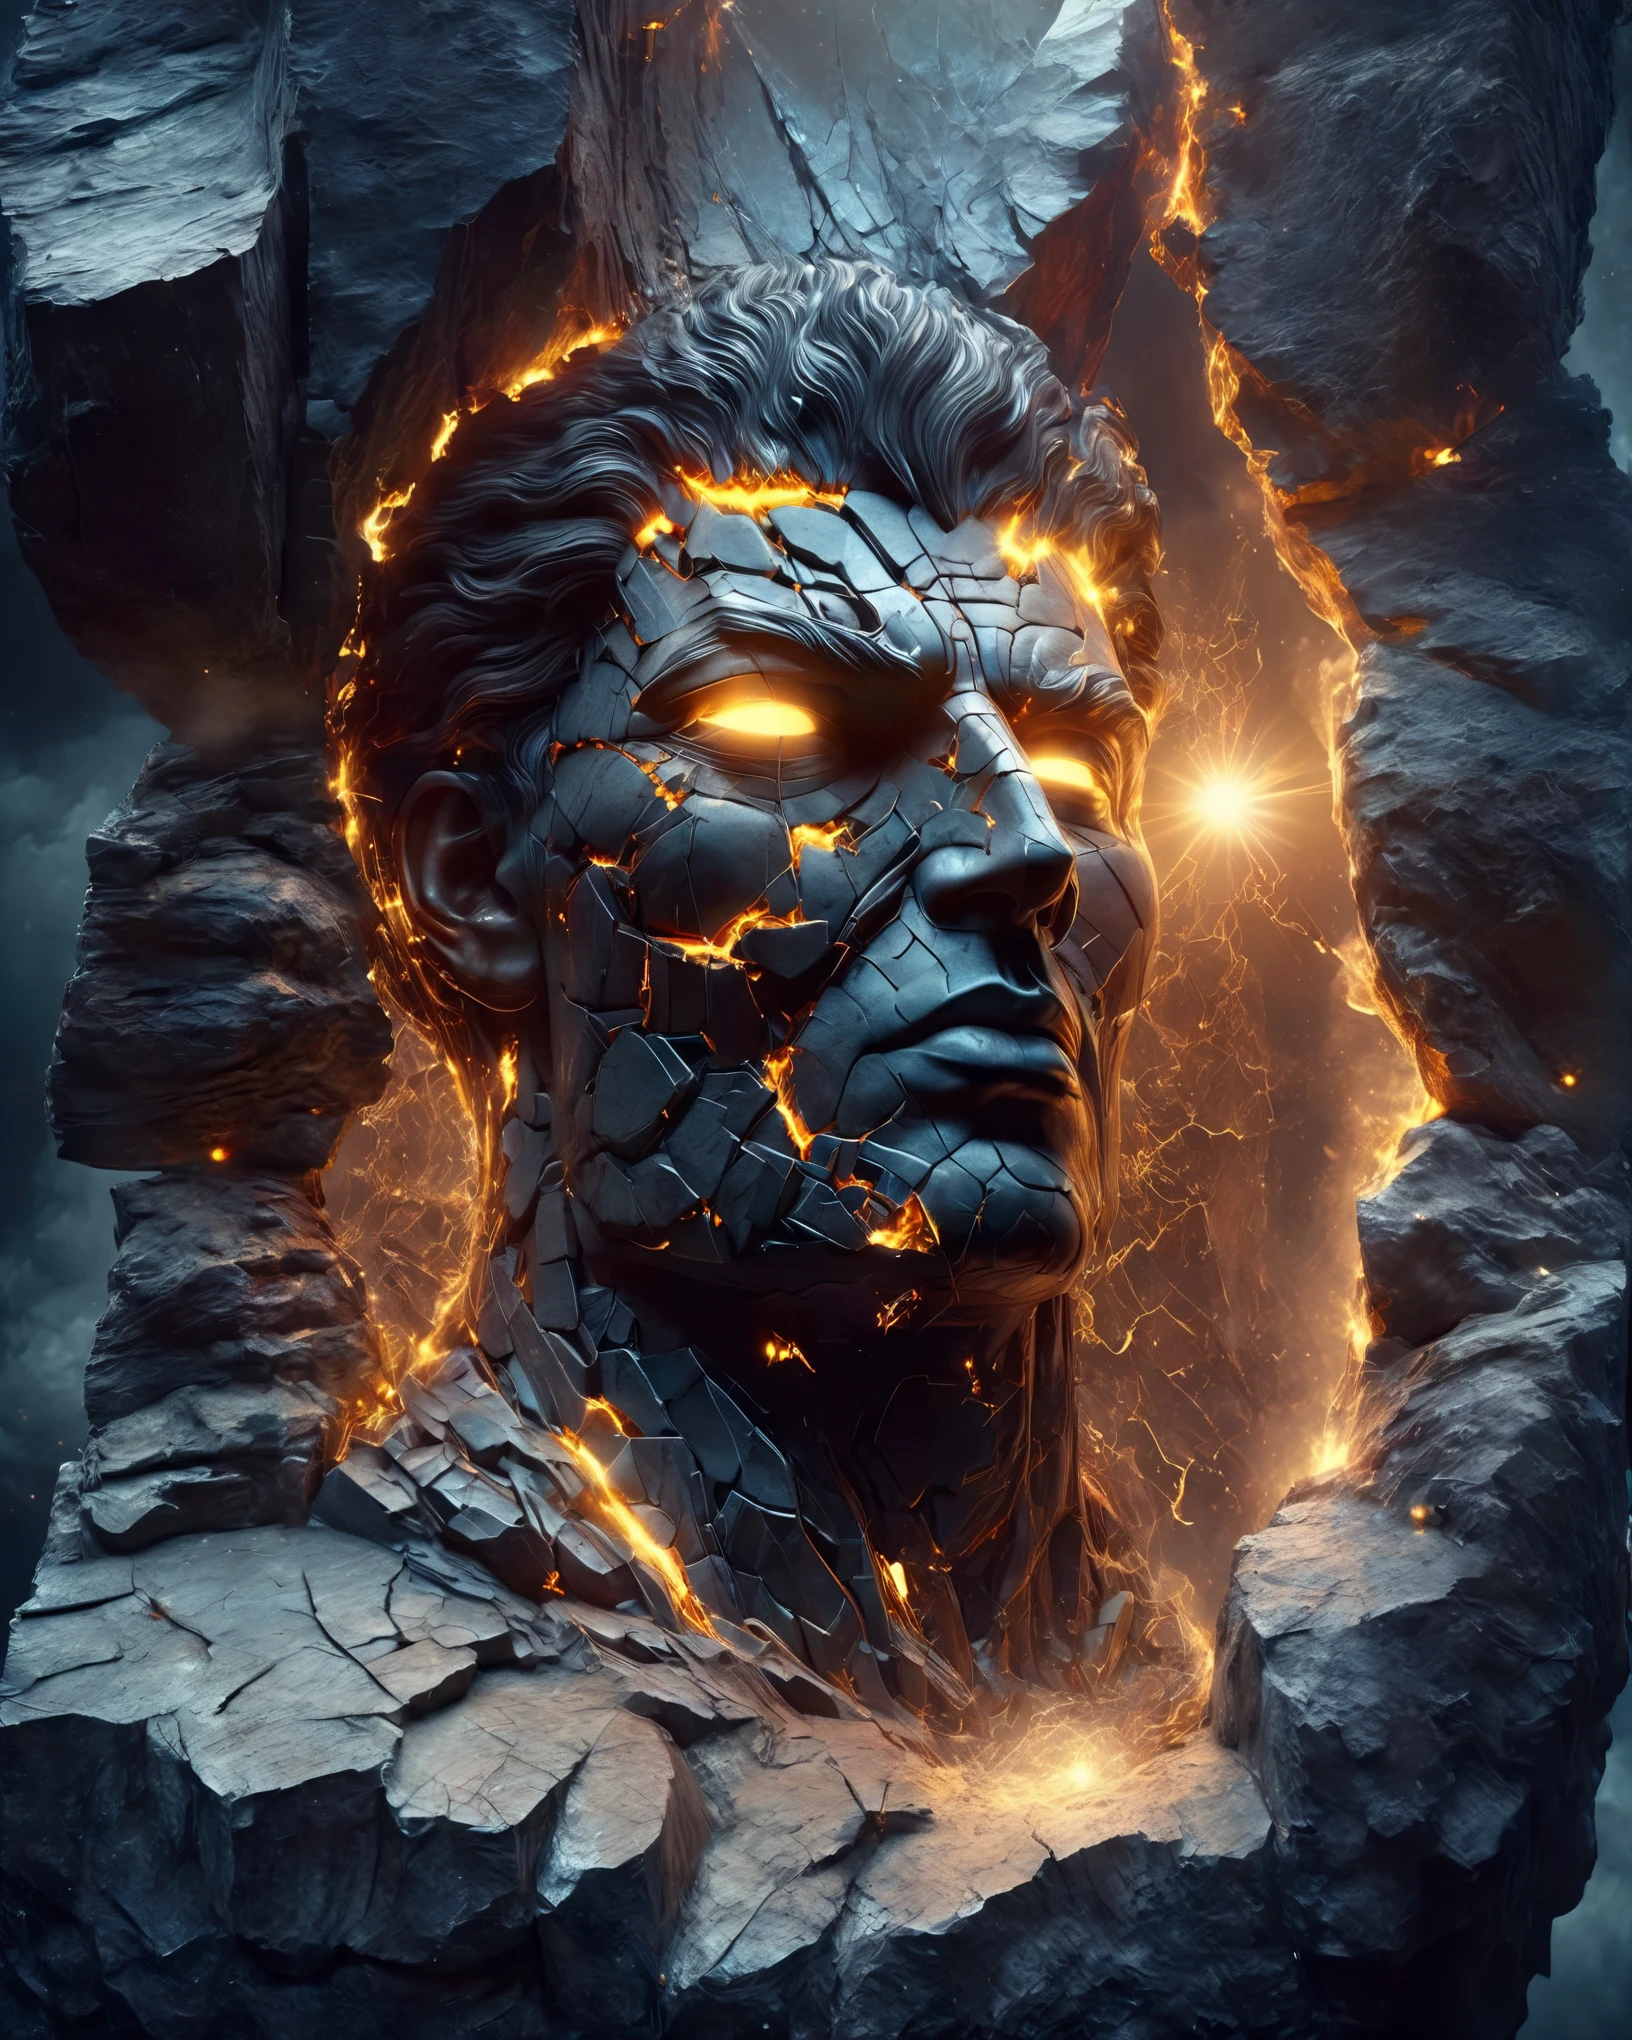 in style of Caras Ionut, beautiful details，A giant statue face of a man，Close-up of a cracked stone statue portrait， Art style of Philip Hodaatte of the human soul, realism ，BDO works by American digital artist Stuart Lippincott，Use advanced tones and shading，Creates a dazzling and mysterious light，The deep spatial pattern and mysterious atmosphere,Create a sci-fi mechanical god realm,Highlighting the insignificance of human beings，and fear of the unknown，minimalist art，fantasy，Surrealism，Handsome man&#39;s face